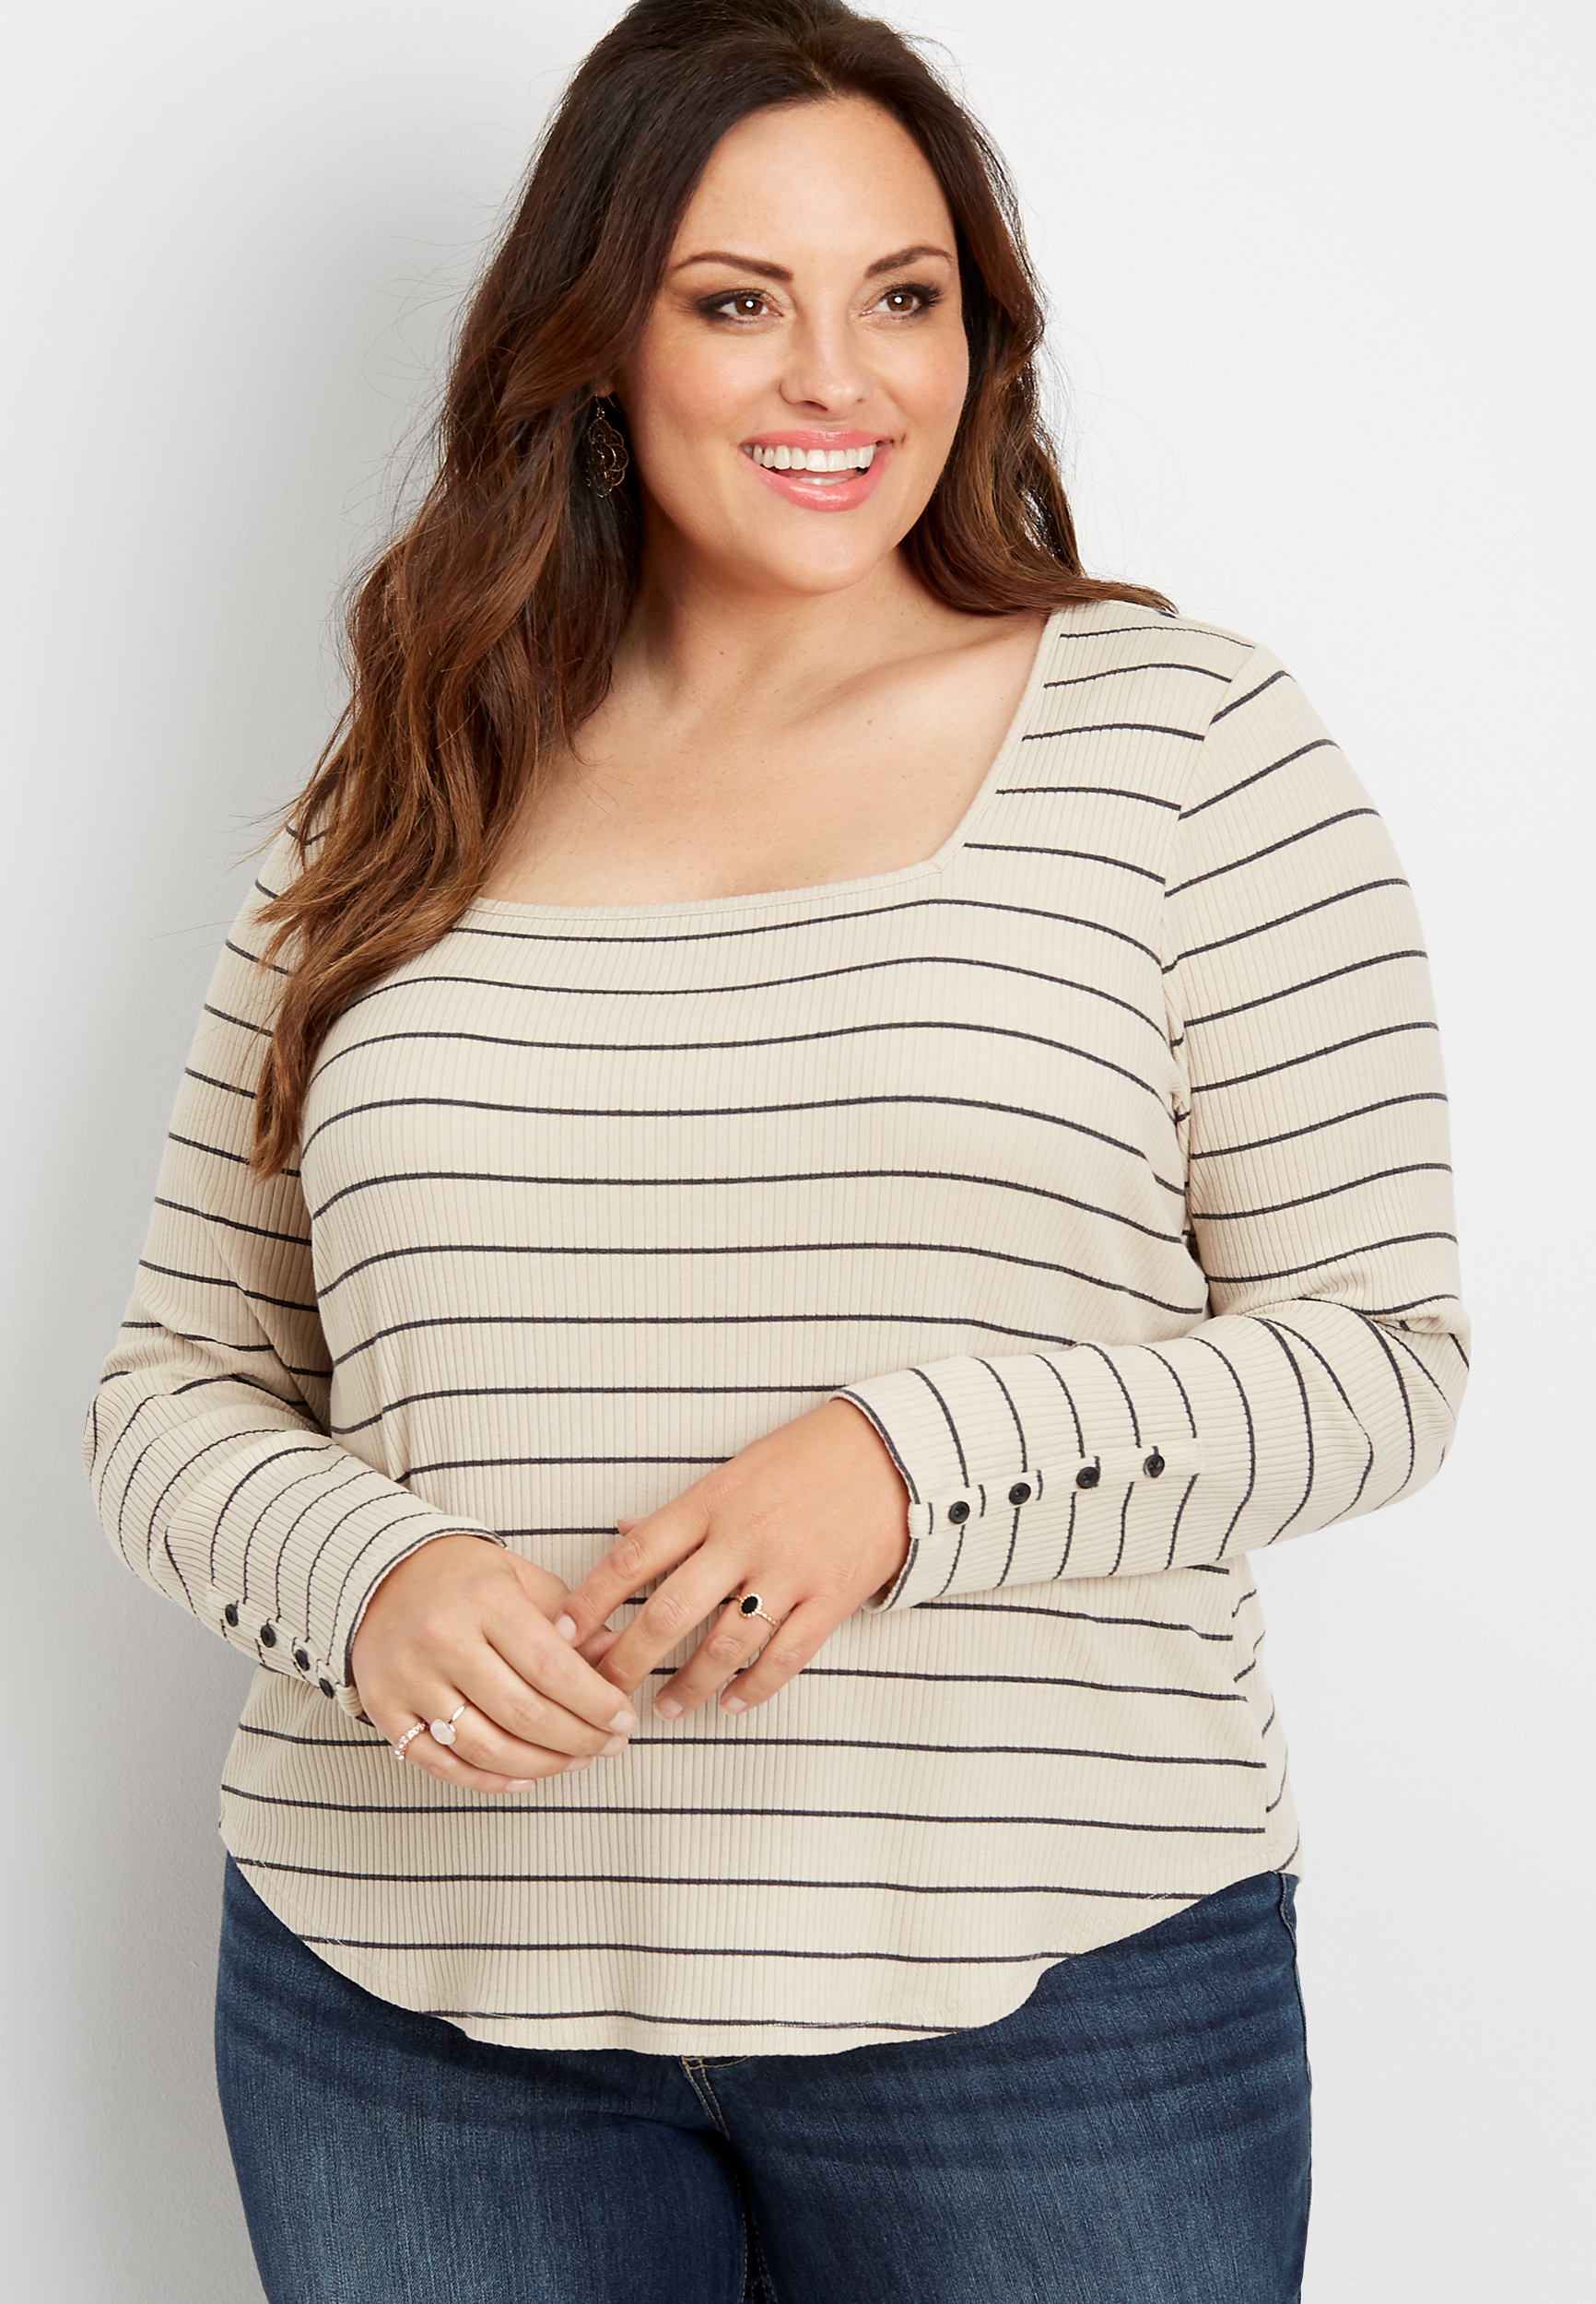 Plus Size Fashion Tops | maurices